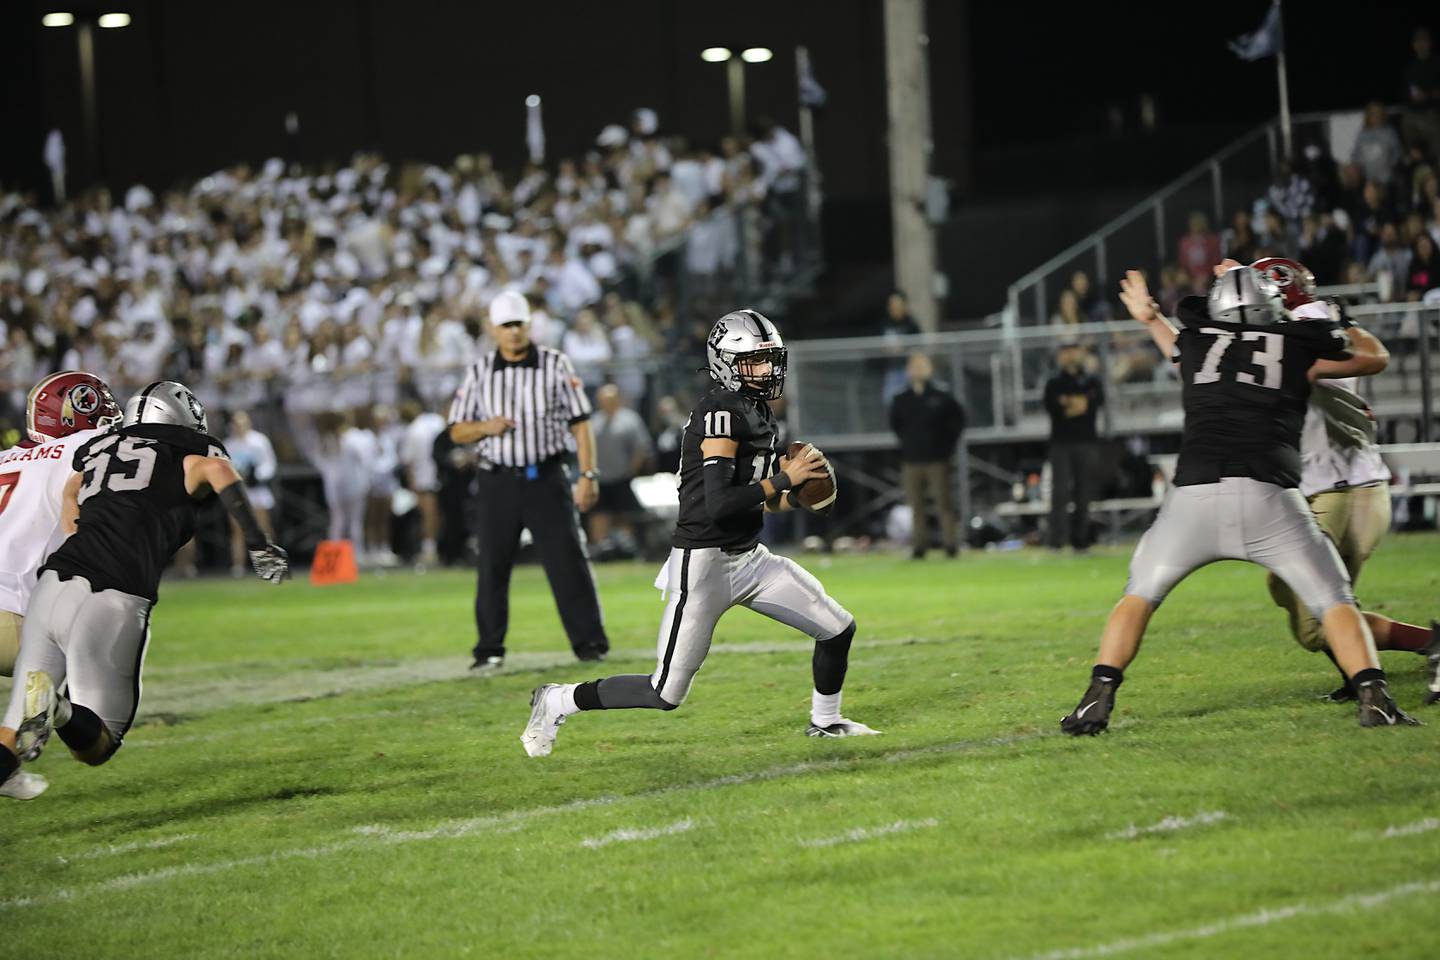 Kaneland's Troyer Carlson scrambles Friday night in a 49-35 loss to Morris. Carlson threw for 320 yards and four touchdowns and ran for 32 yards and a TD.